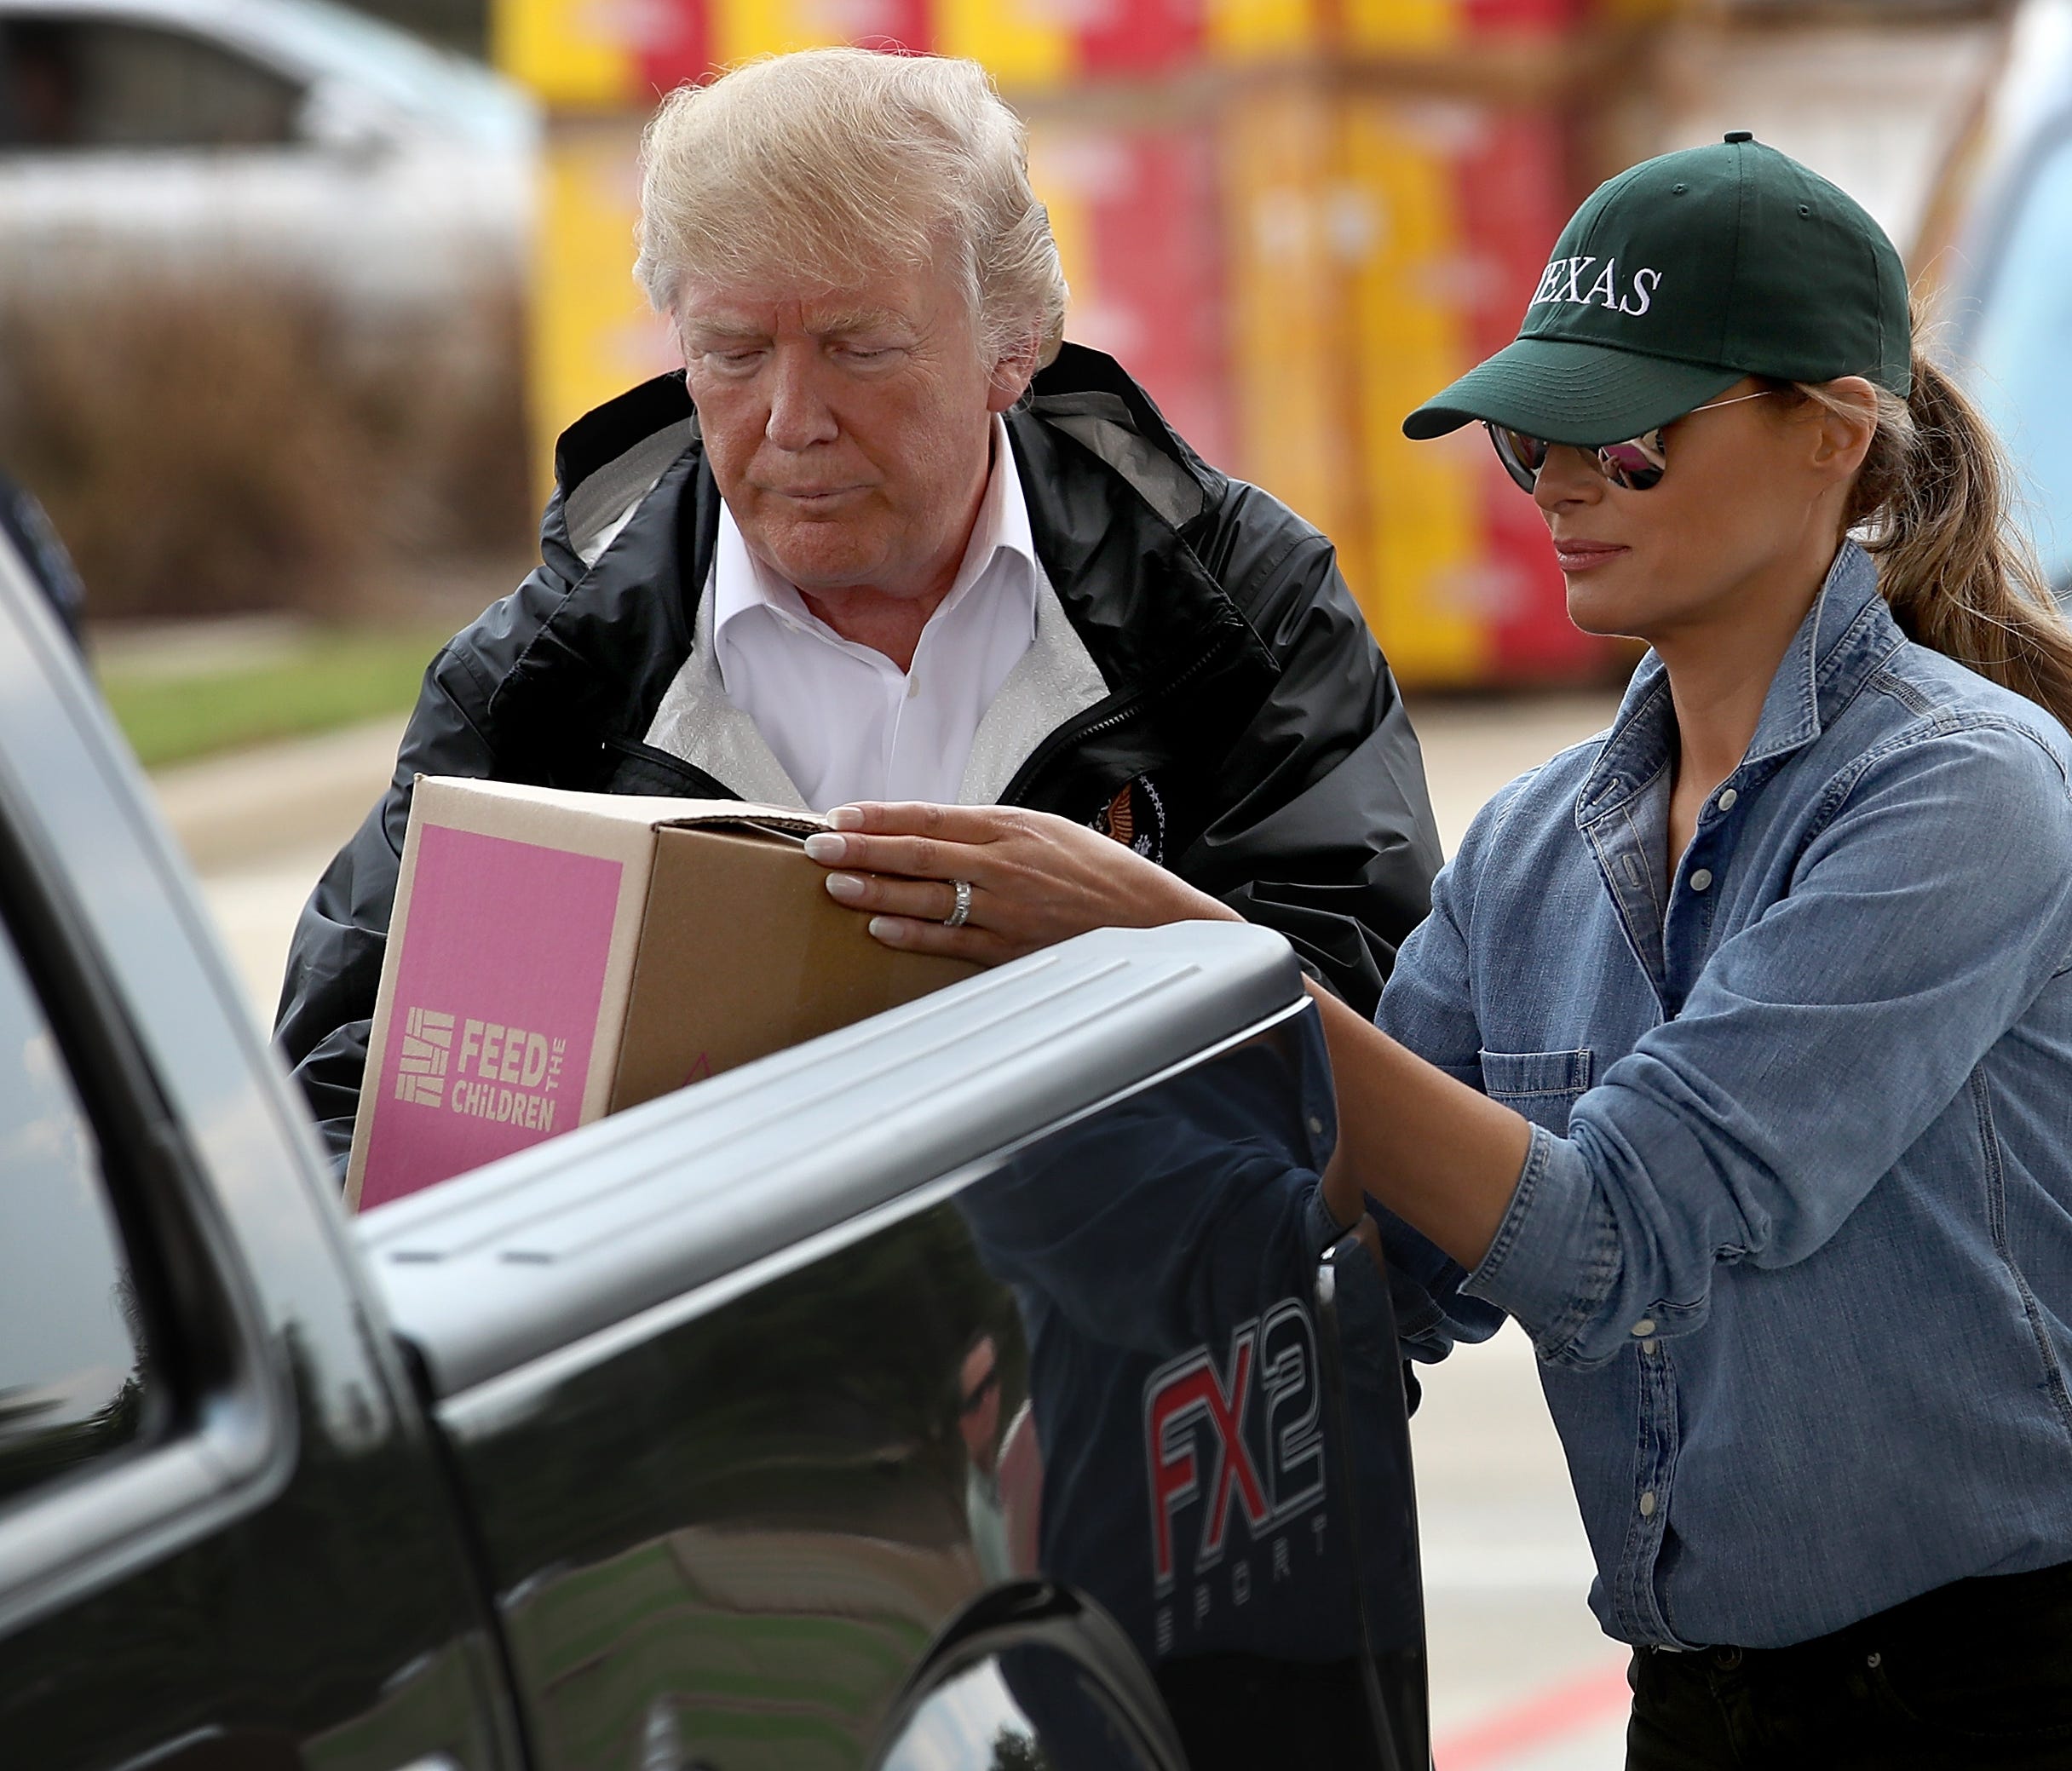 President Trump and first lady Melania Trump load emergency supplies into the back of a pickup truck for  residents impacted by Hurricane Harvey while visiting the First Church of Pearland September 2, 2017 in Pearland, Texas.